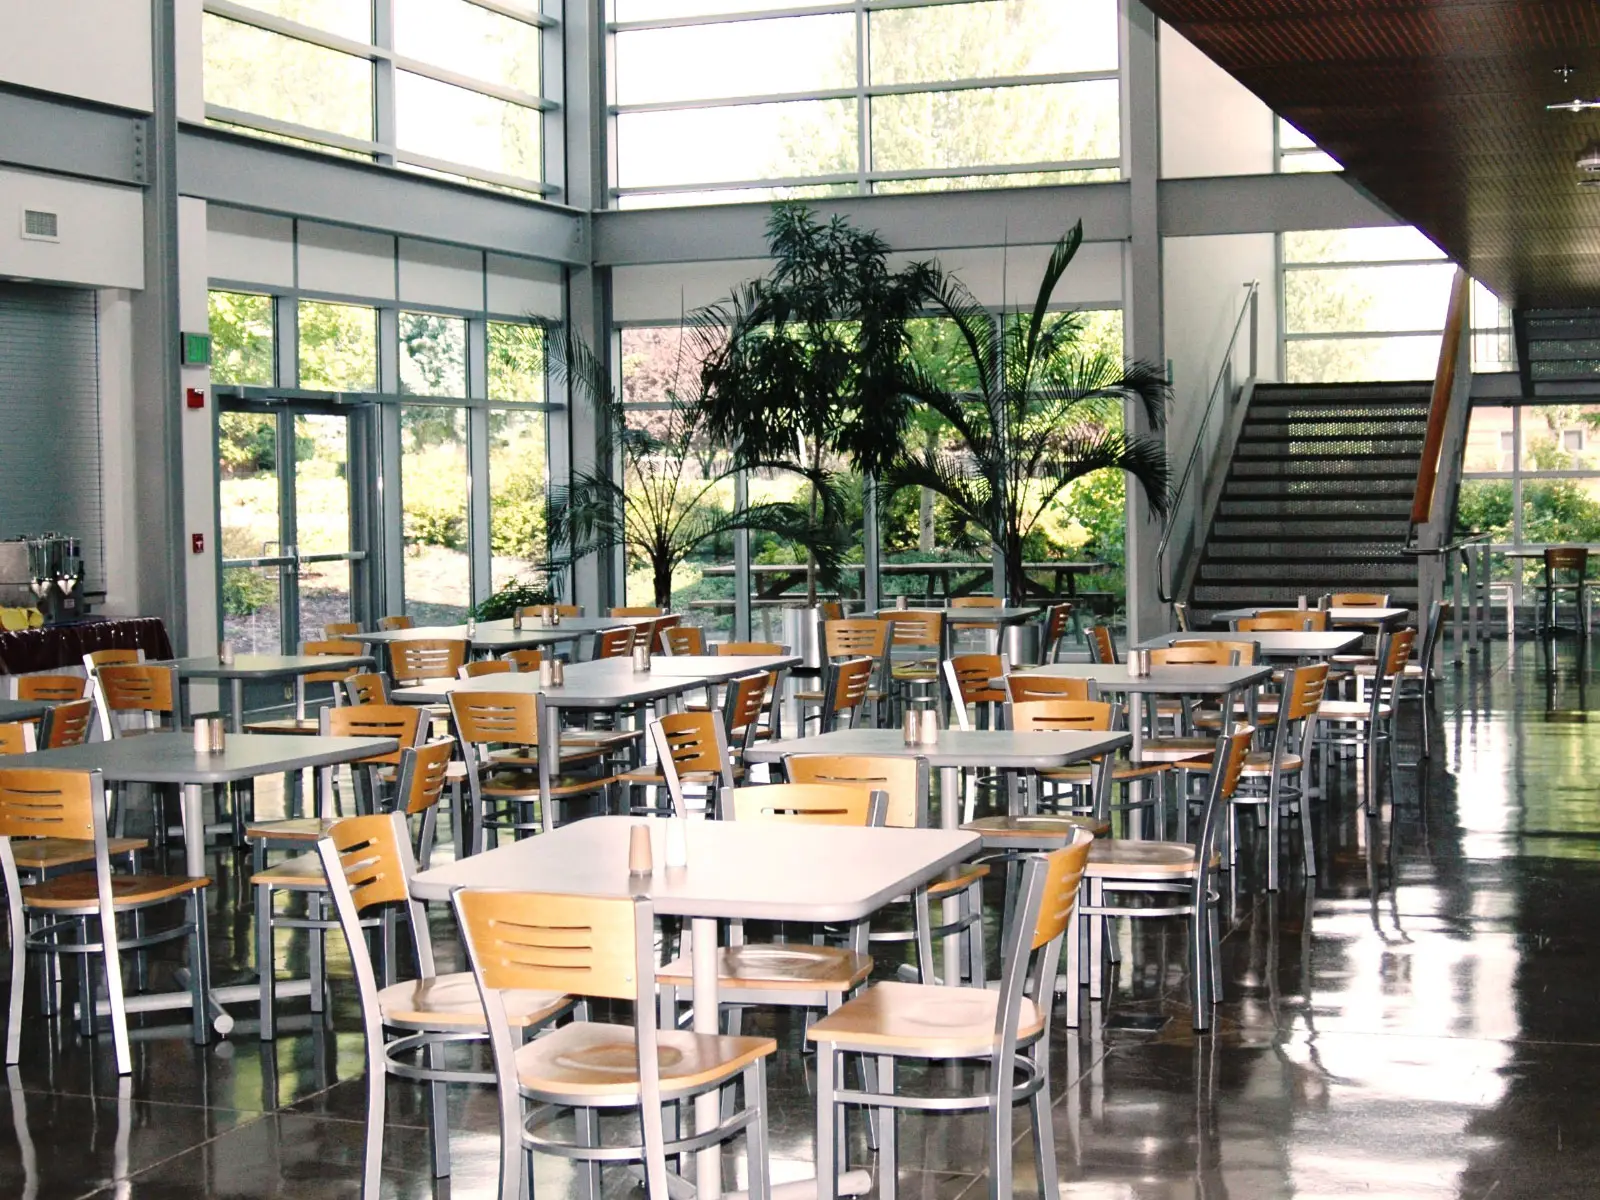 Rows of tables with chairs in the open commons area next to a set of stairs on the Wilsonville campus